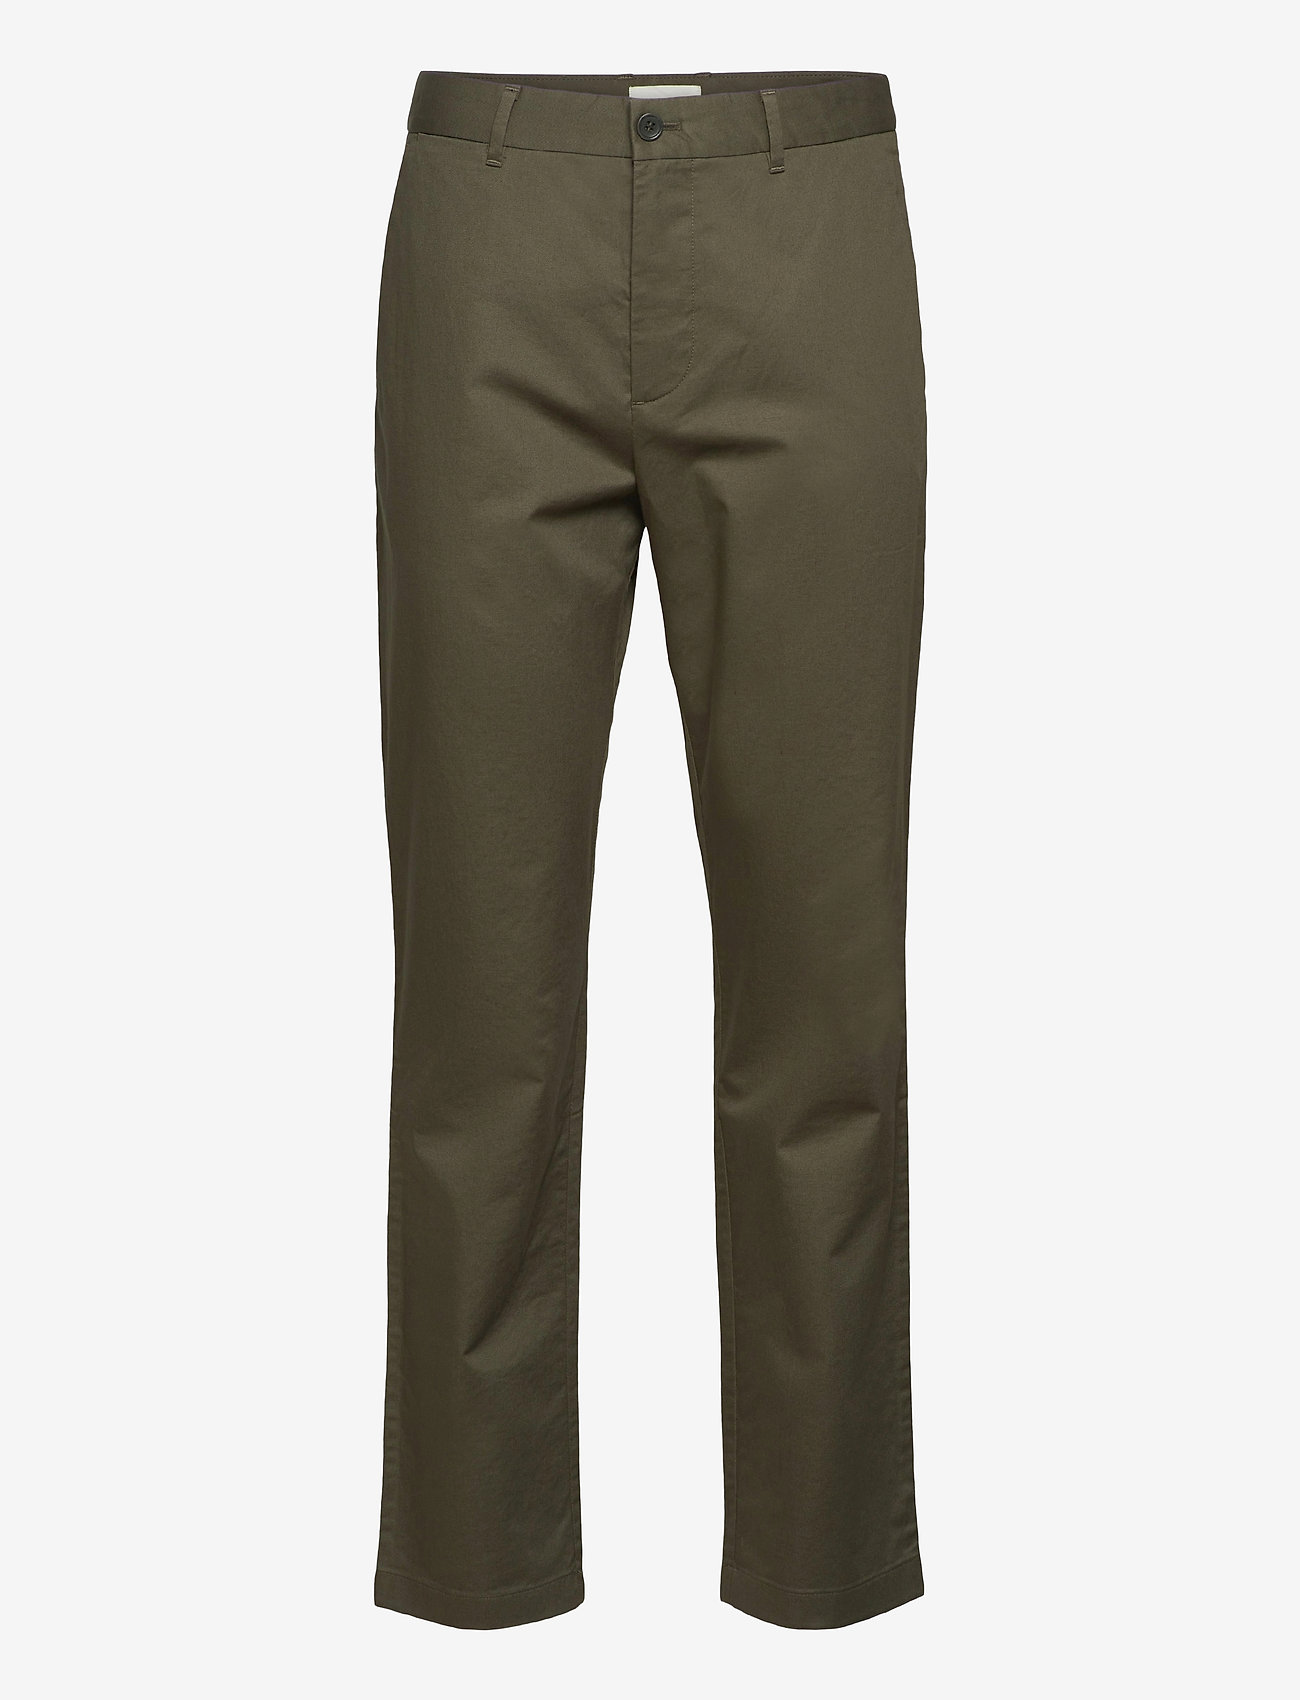 Wood Wood - Marcus light twill trousers - chinosy - olive - 0